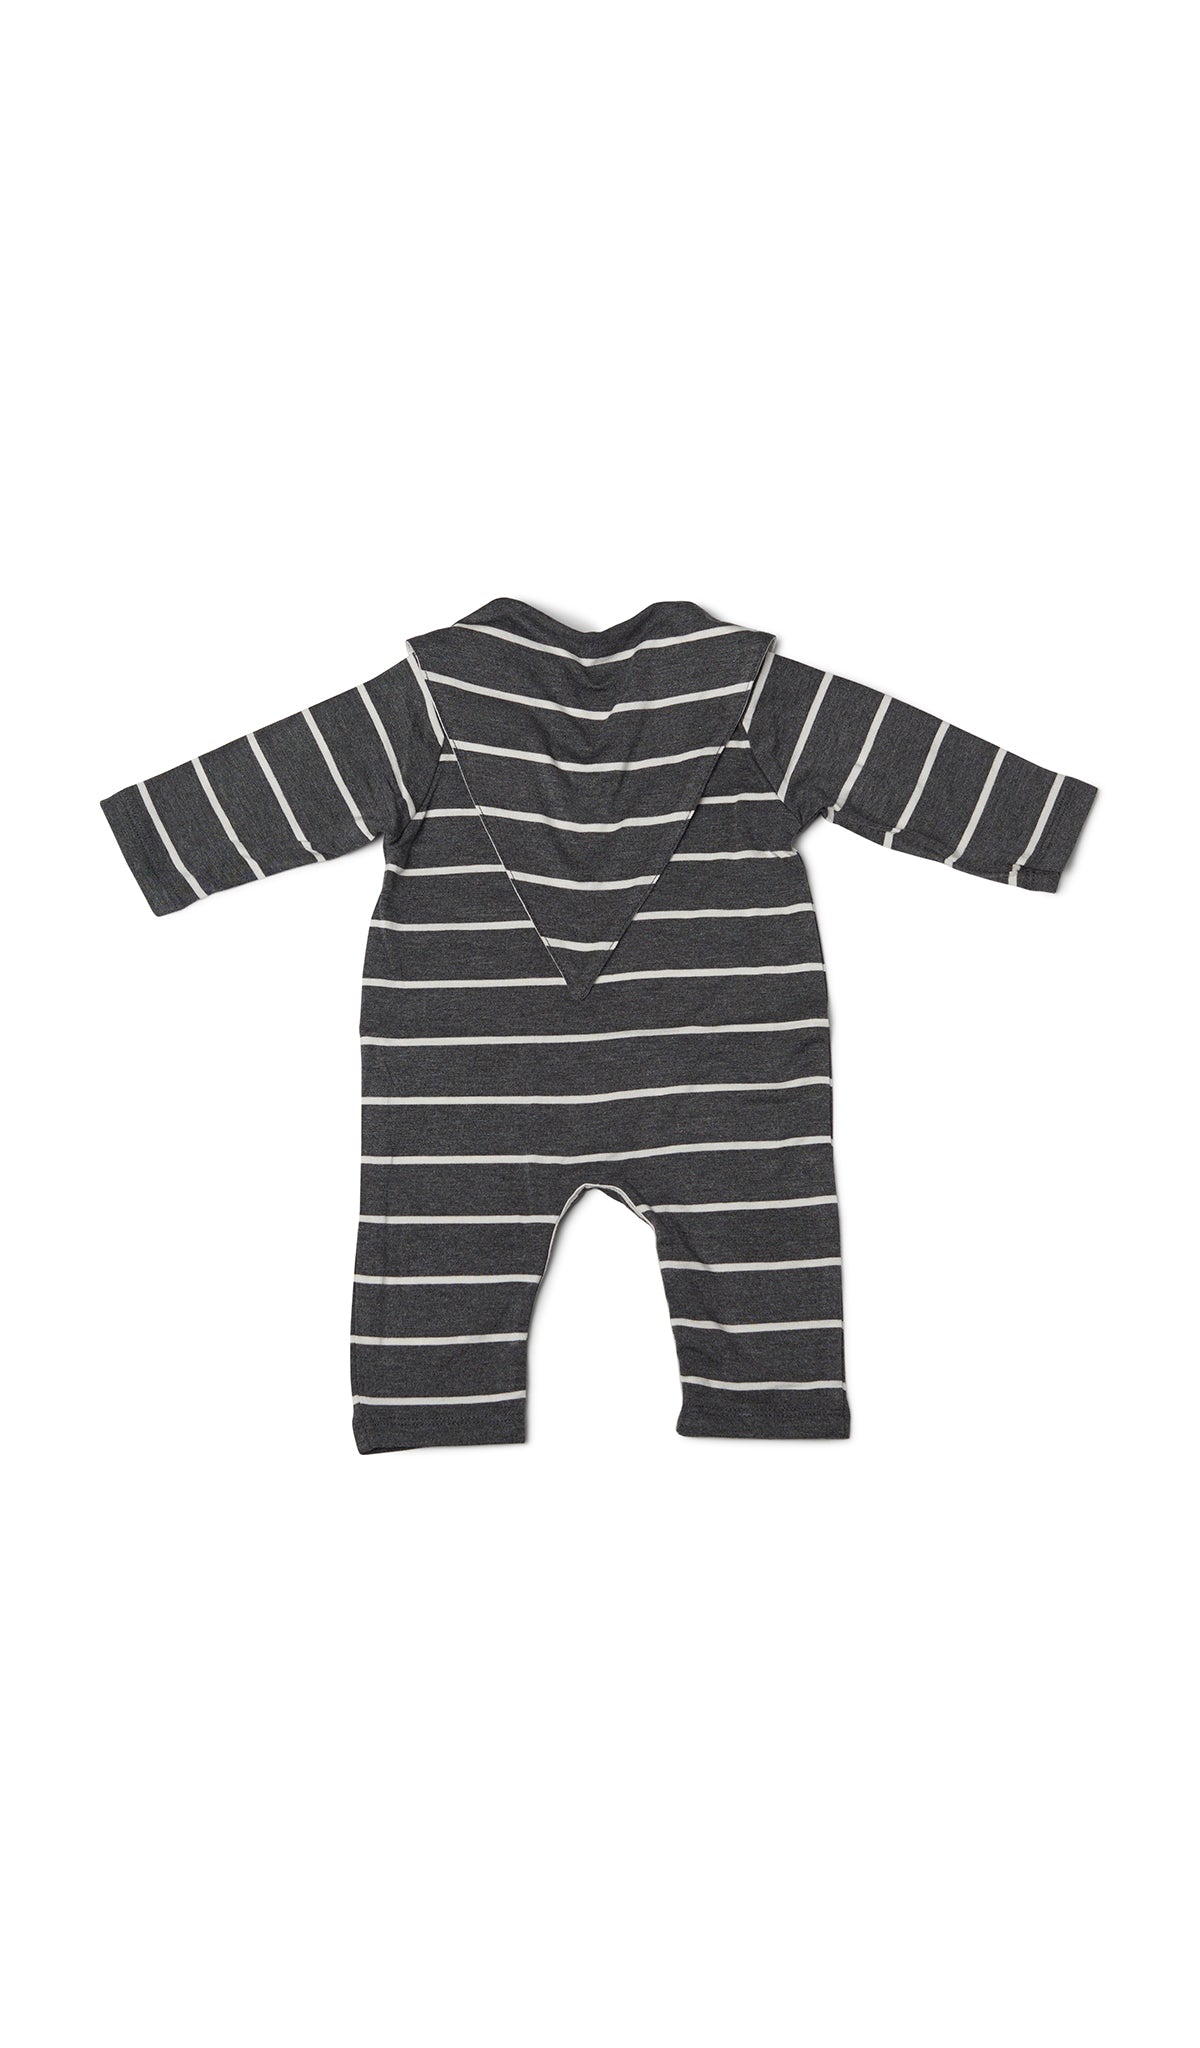 Charcoal Romper 2-Piece flat shot of long sleeve romper with matching reversible bib worn over garment, showing stripe side.